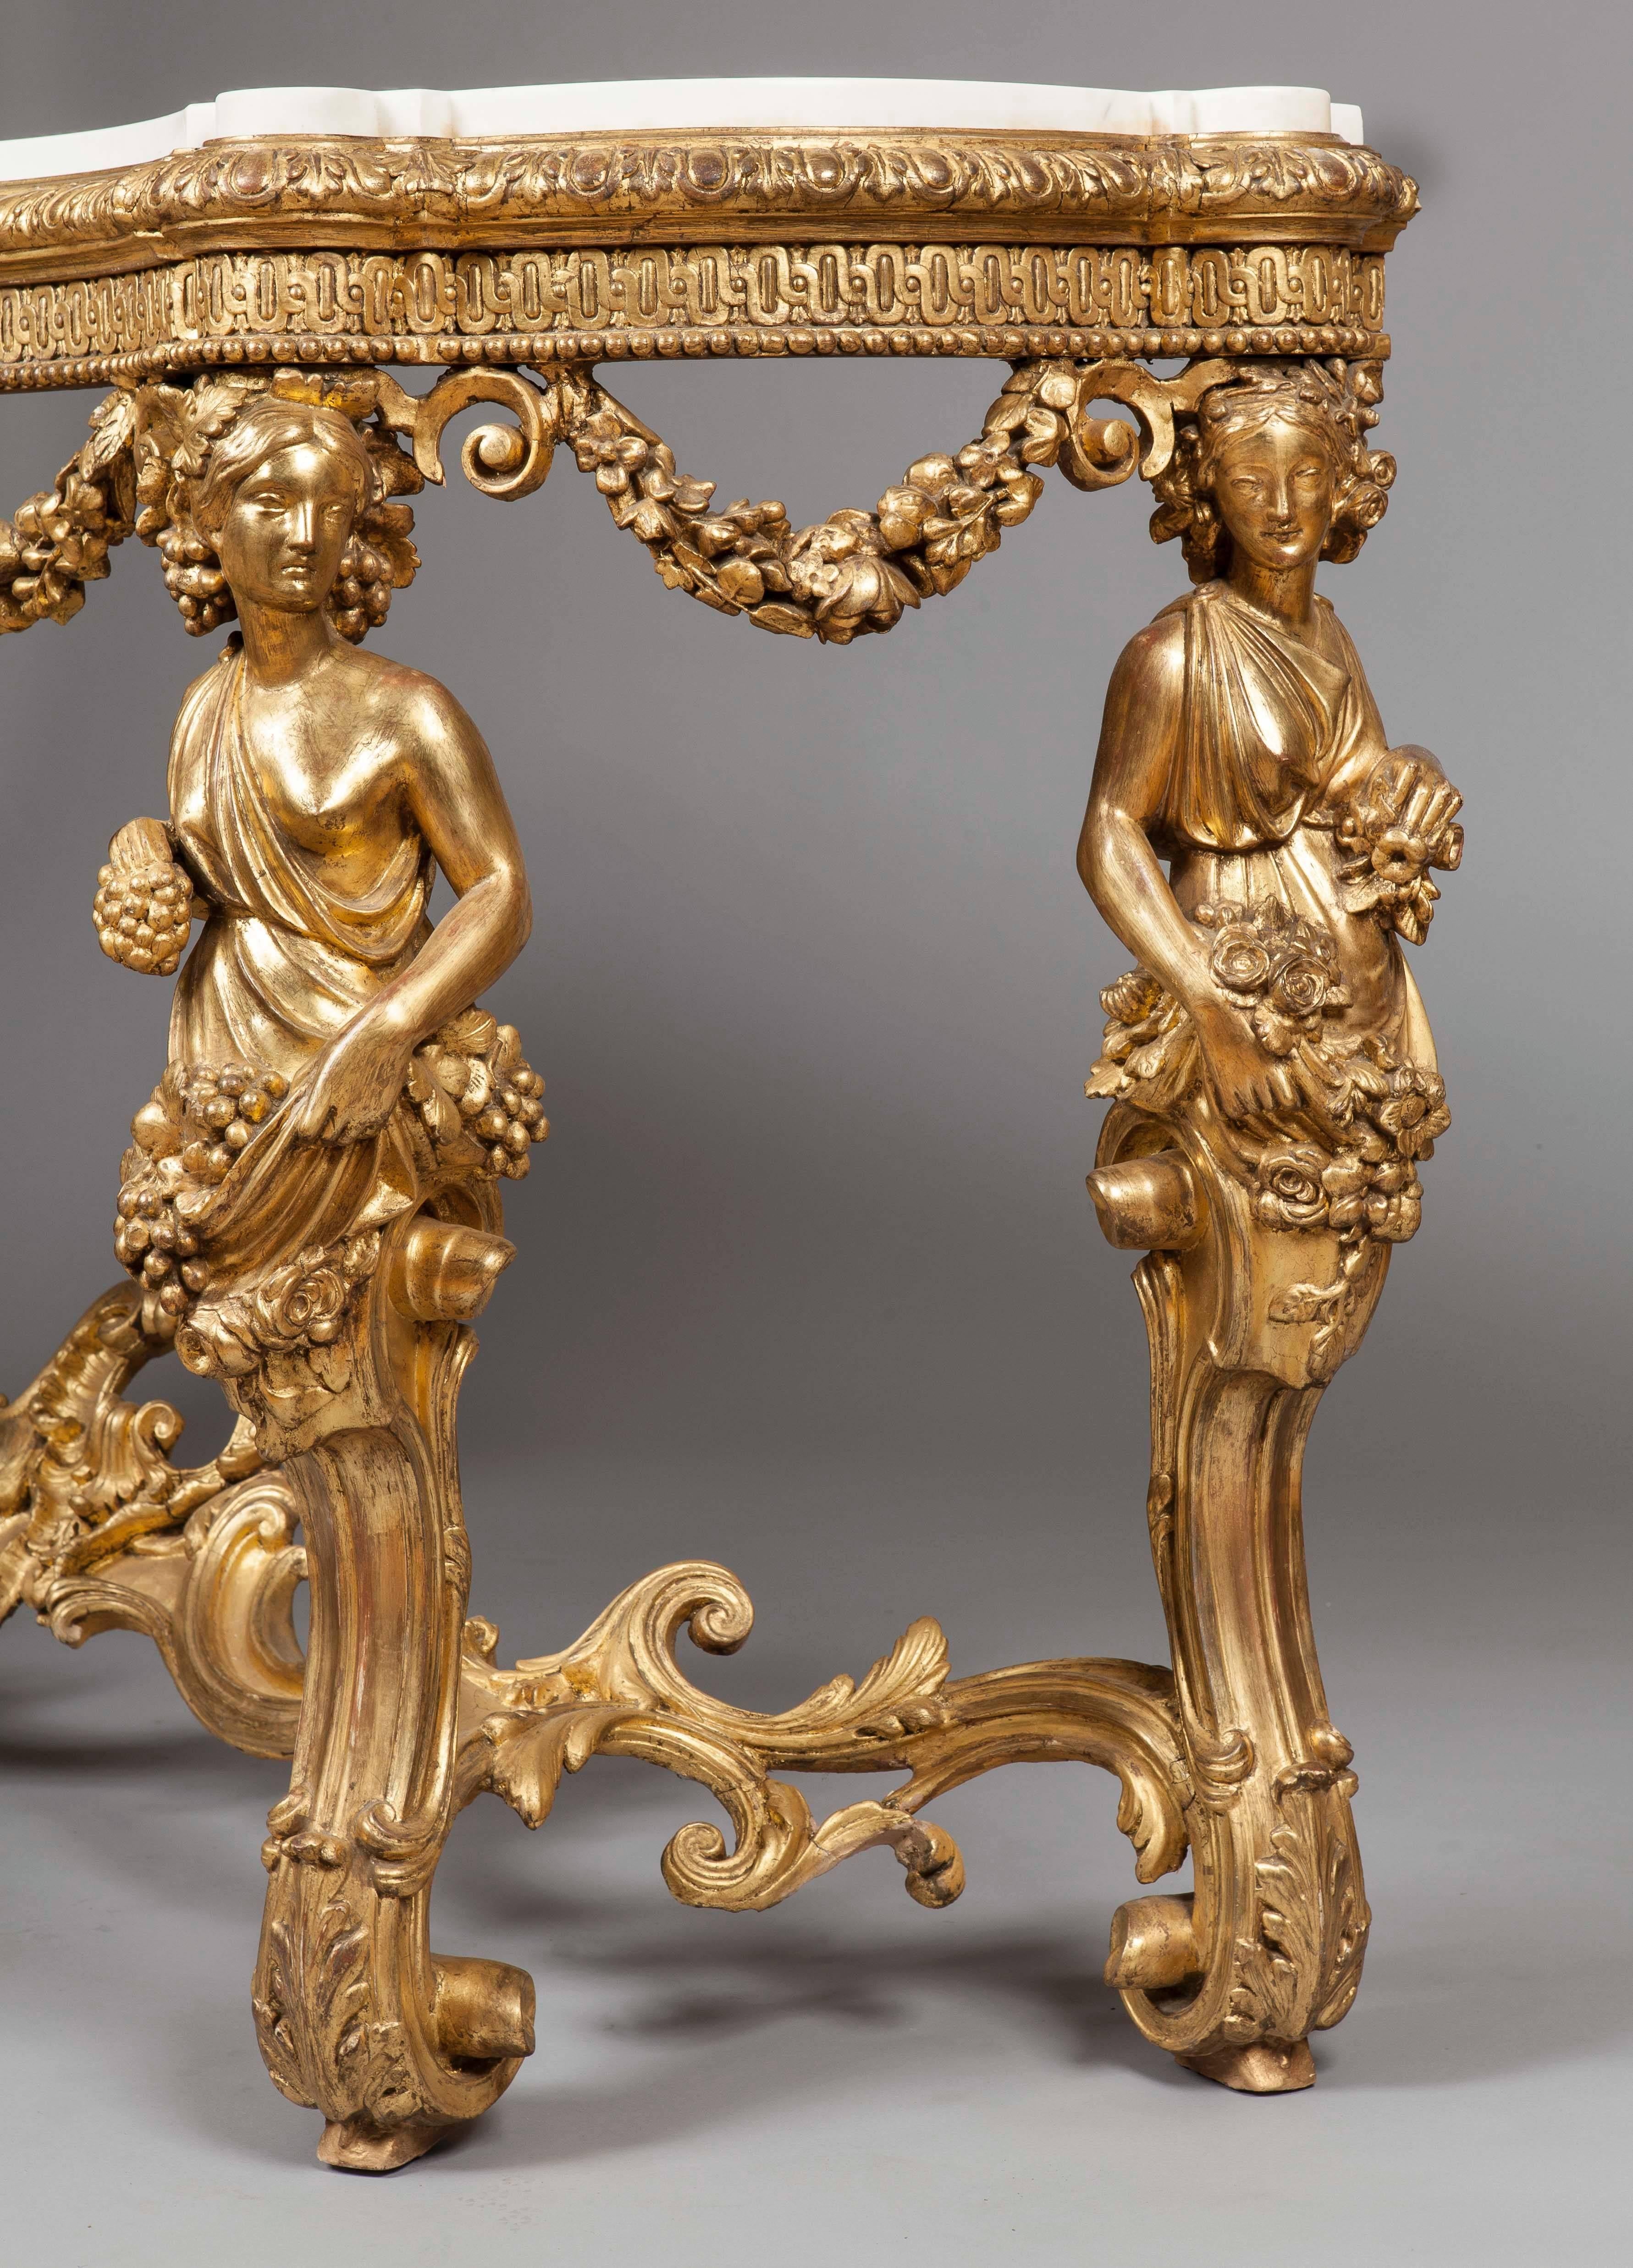 A fine console table in the early Louis XV manner.

Of serpentine form, constructed in giltwood and Carrara marble; four female caryatids bearing flowers issue from scrolled foliate adorned scrolled bases which are conjoined by a swept stretcher